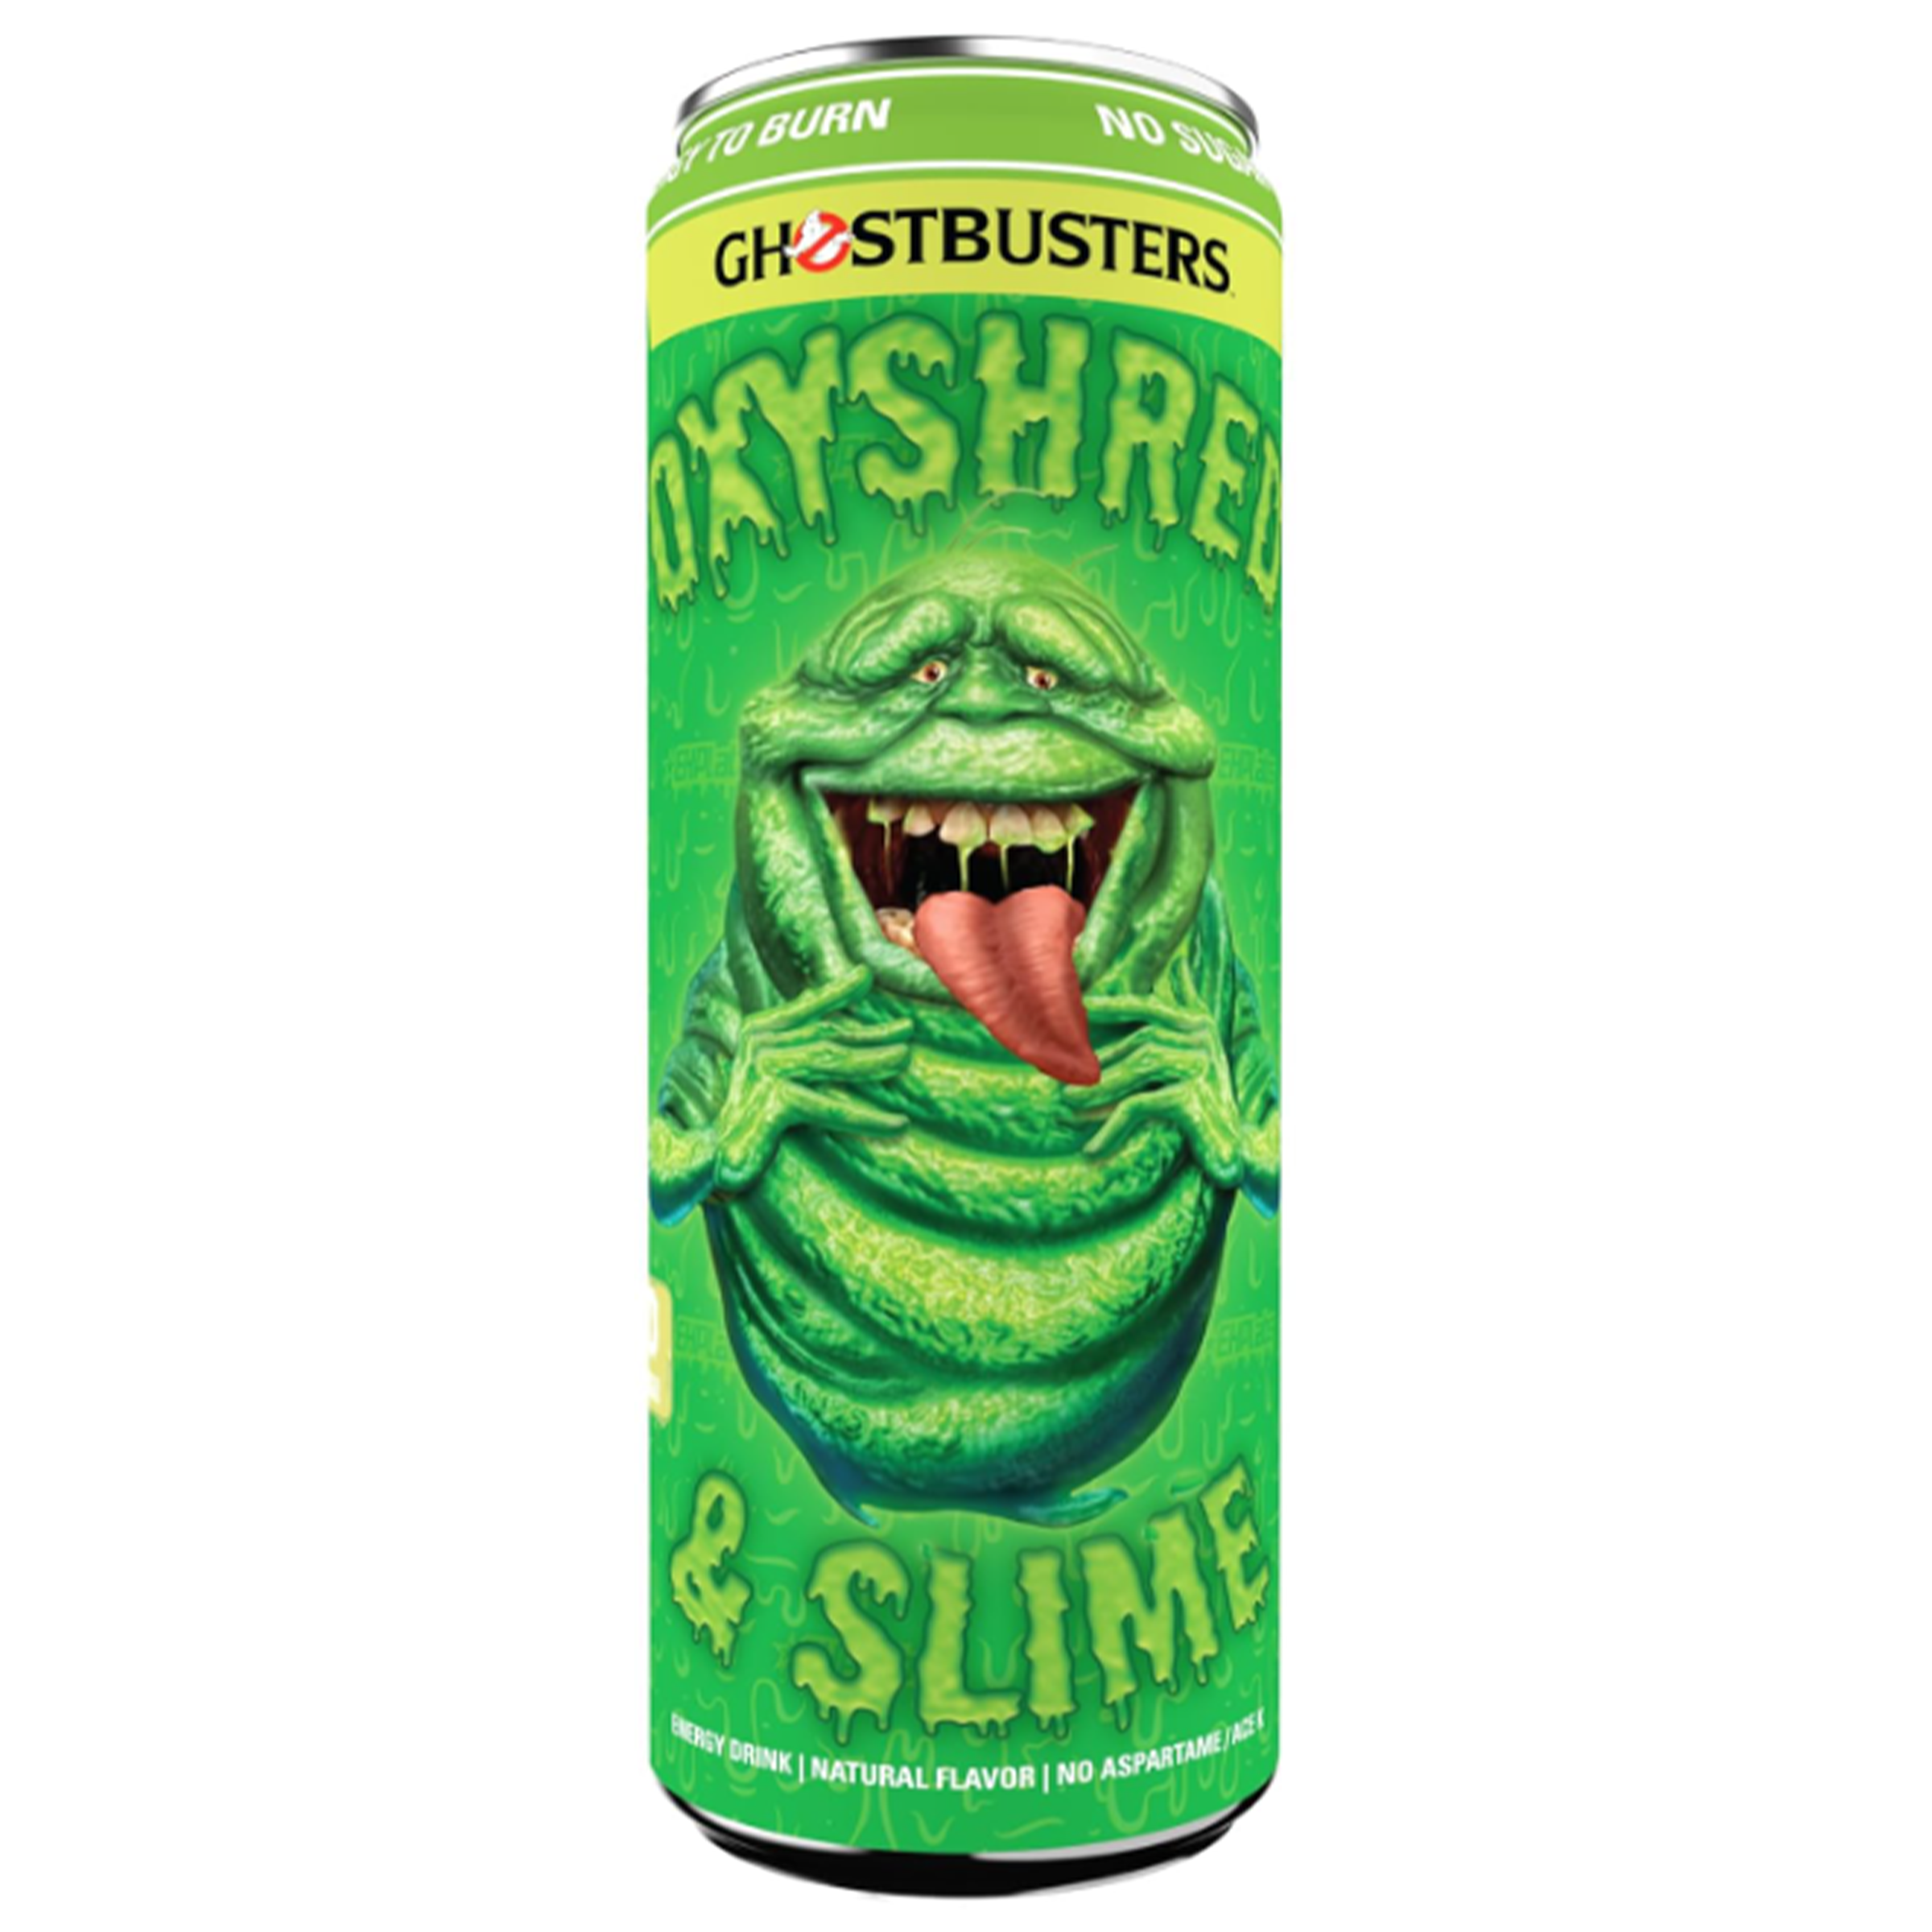 Ghostbusters - Oxy Shred Slime